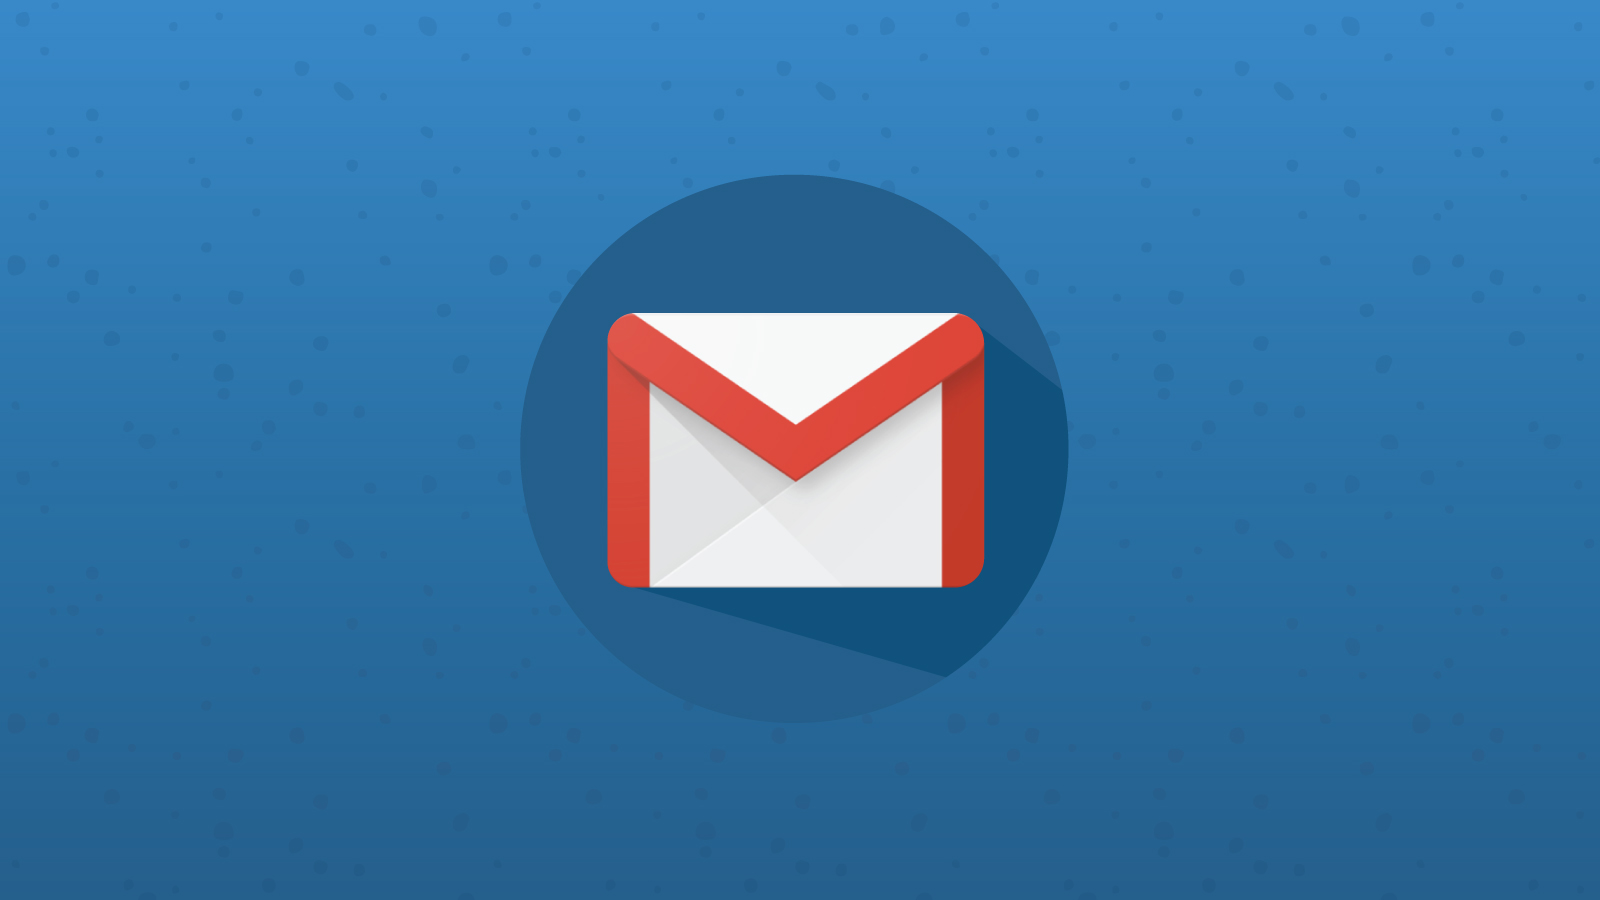 how to put a red gmail icon on windows 10 desktop